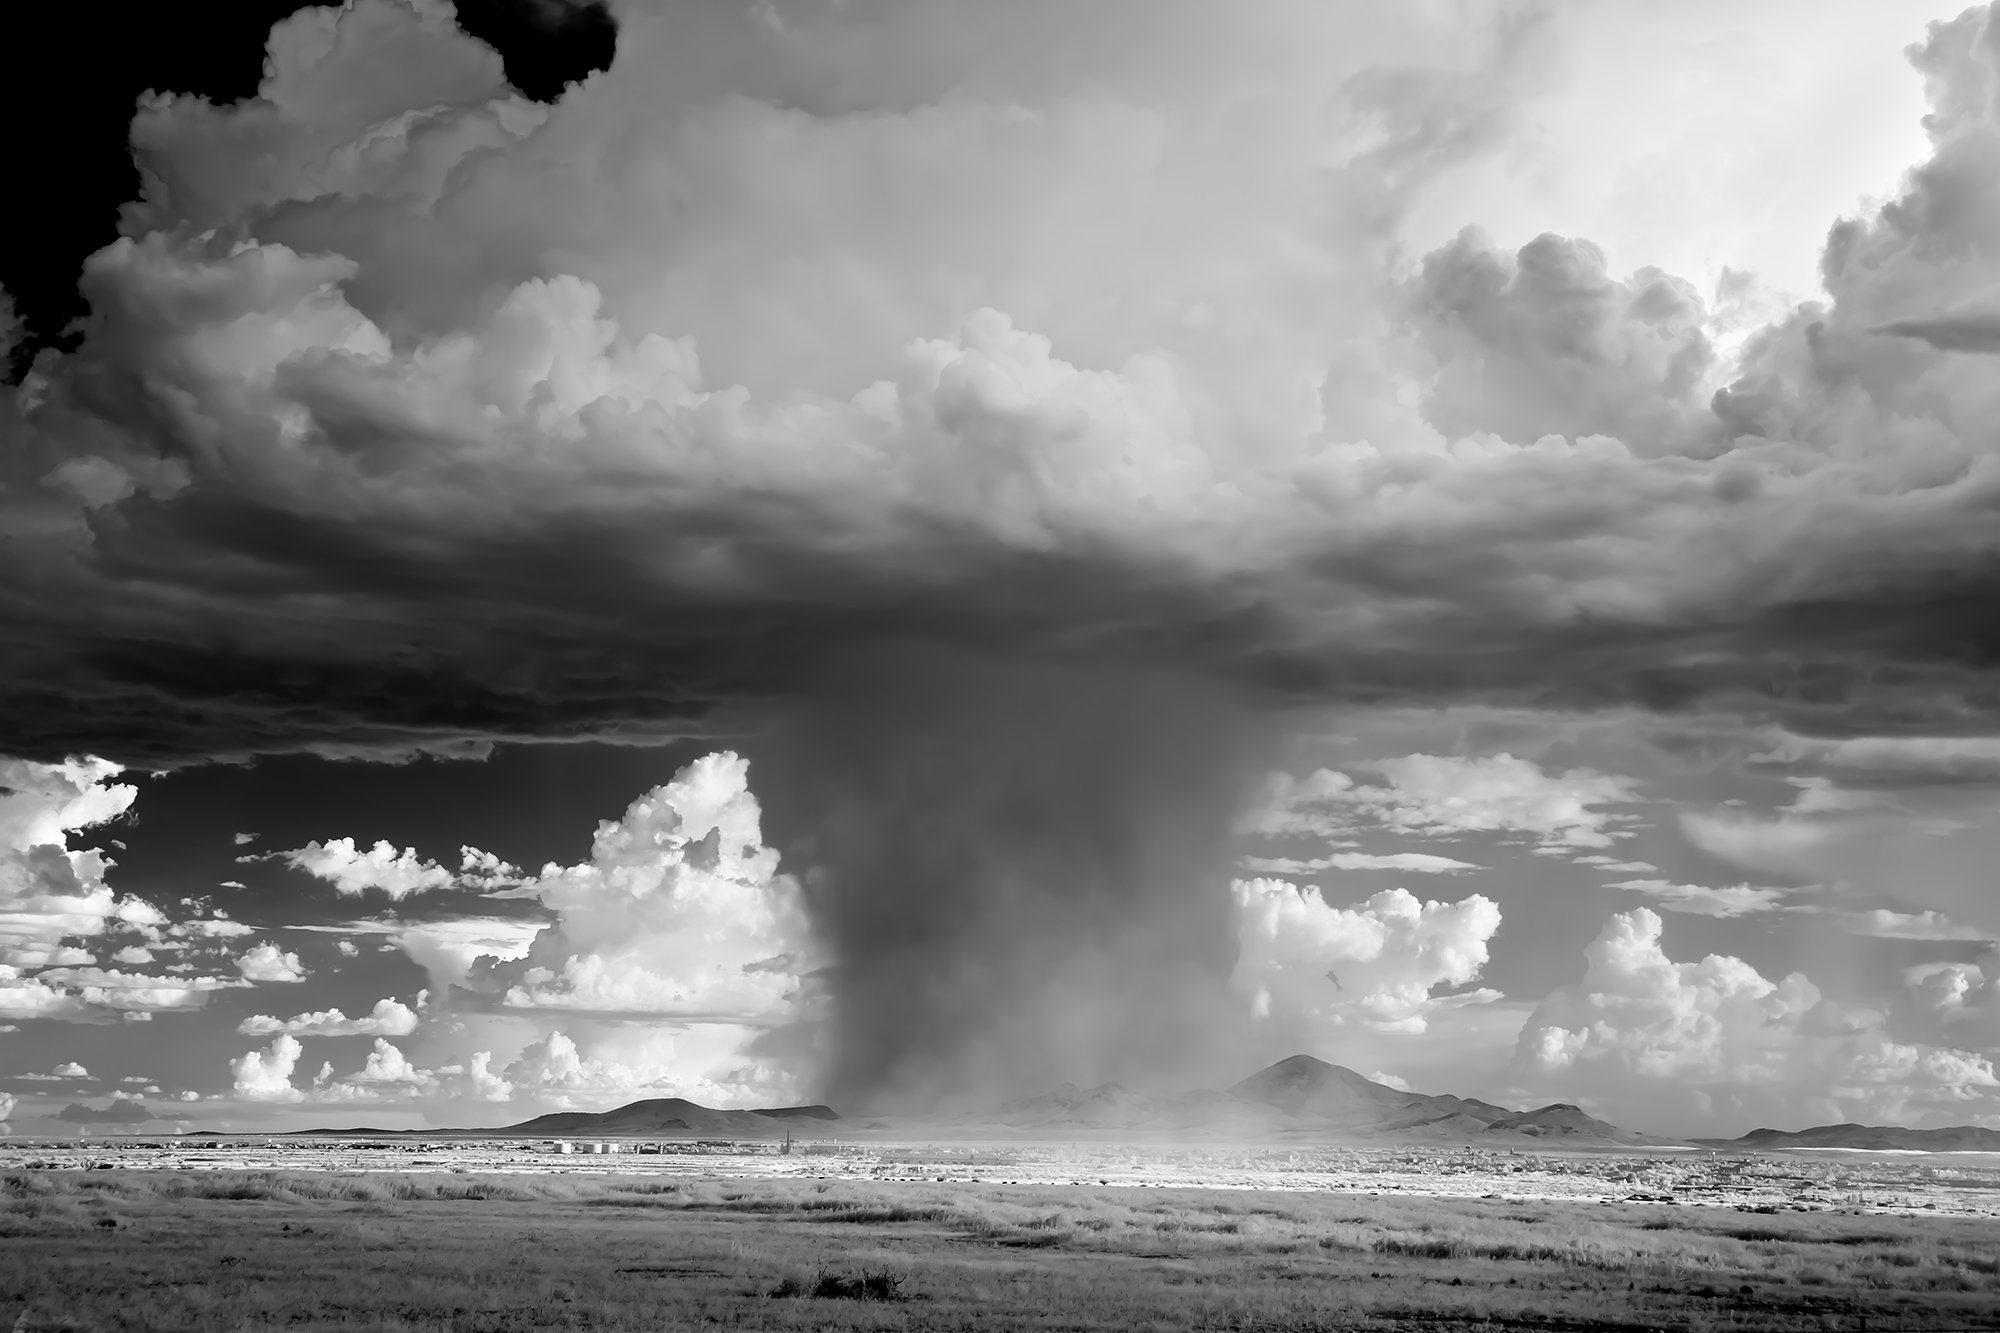 Learn why Mitch Dobrowner Sees Extreme Weather Better in Monochrome